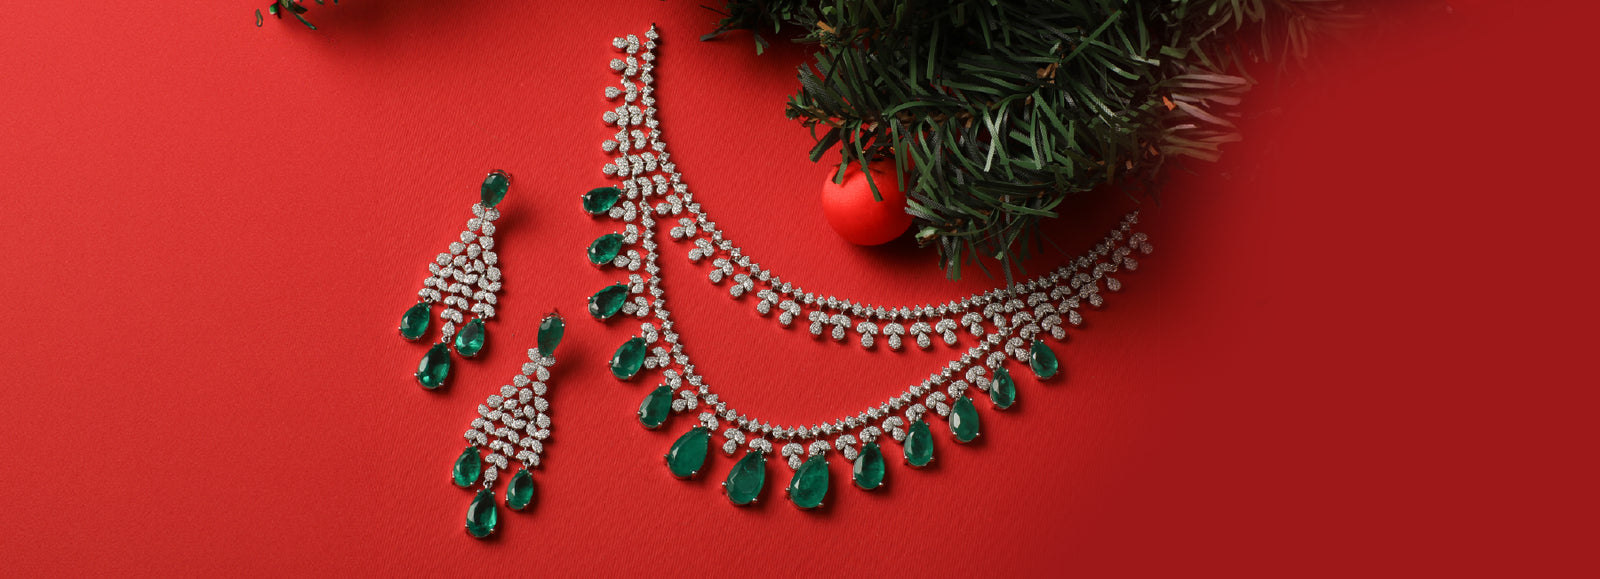 Shine Bright this Christmas with Tarinika Jewellery Collections